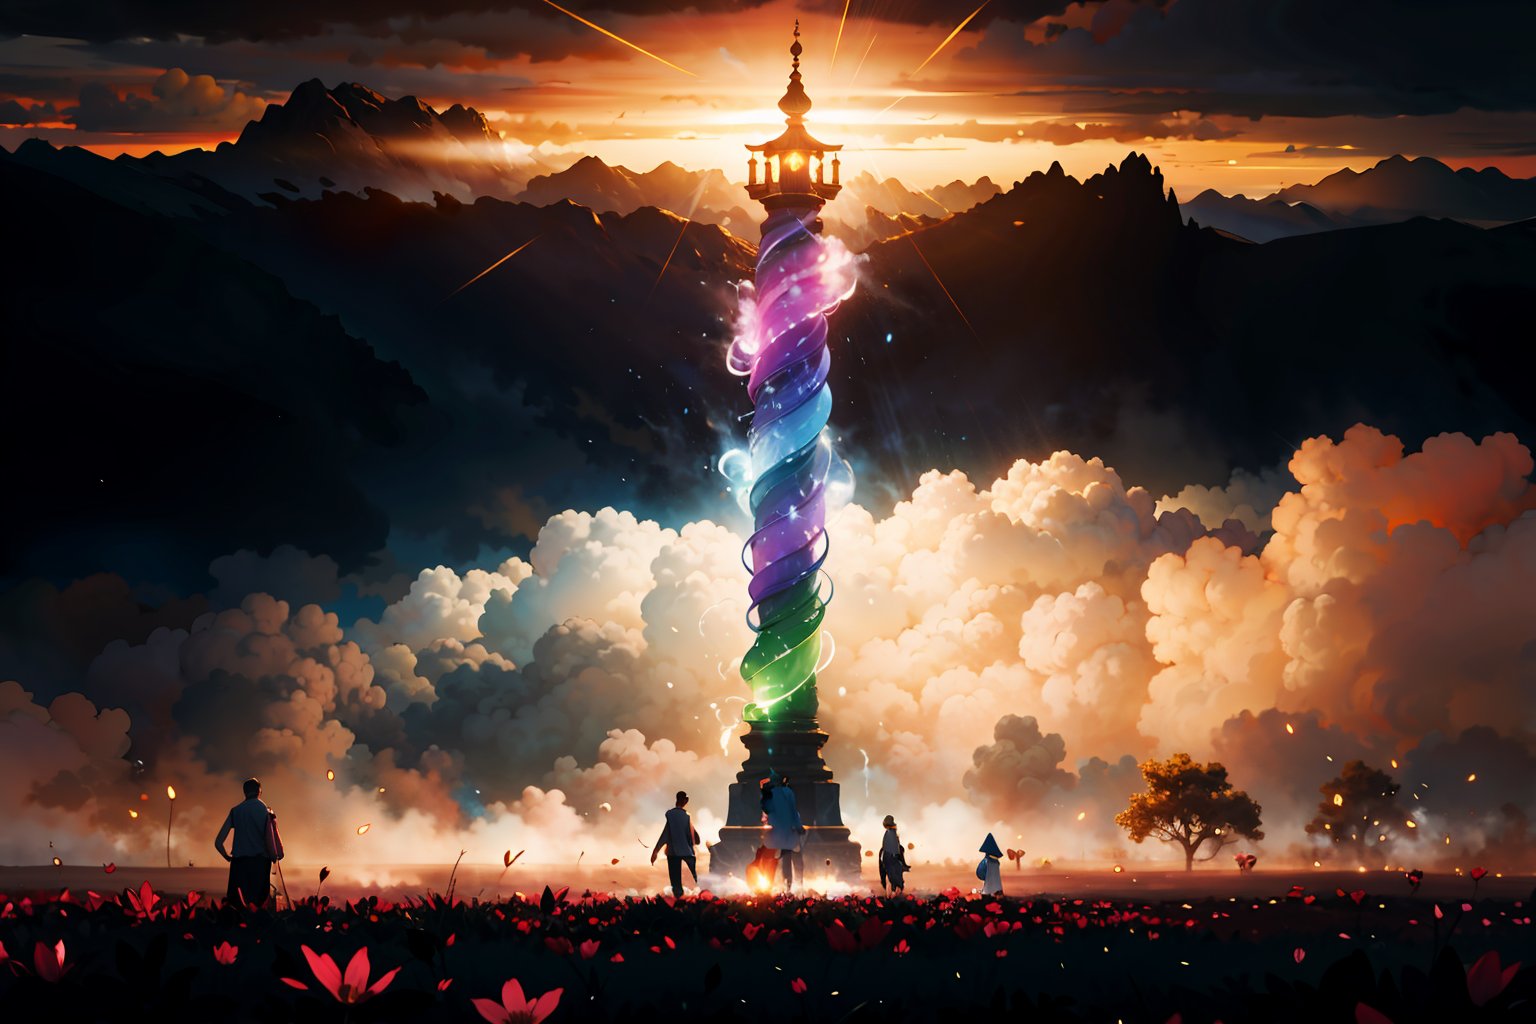 A divine assembly unfurls amidst a misty twilight, as Prisma Sakuraoil's vibrant daubs of opaline rainbow hues splash and trickle across the heavenly court. Immortals and gods congregate, their ethereal forms bathed in the soft glow of cinematic lighting, with subtle lens flares and bokeh effects adding depth to the scene. As foggy dusk settles, delicate blooms of light emanate from the gathering, casting an otherworldly ambiance. HDR technology captures the ultra-high detail of this mystical gathering, centered within a swirl of misty mystery.